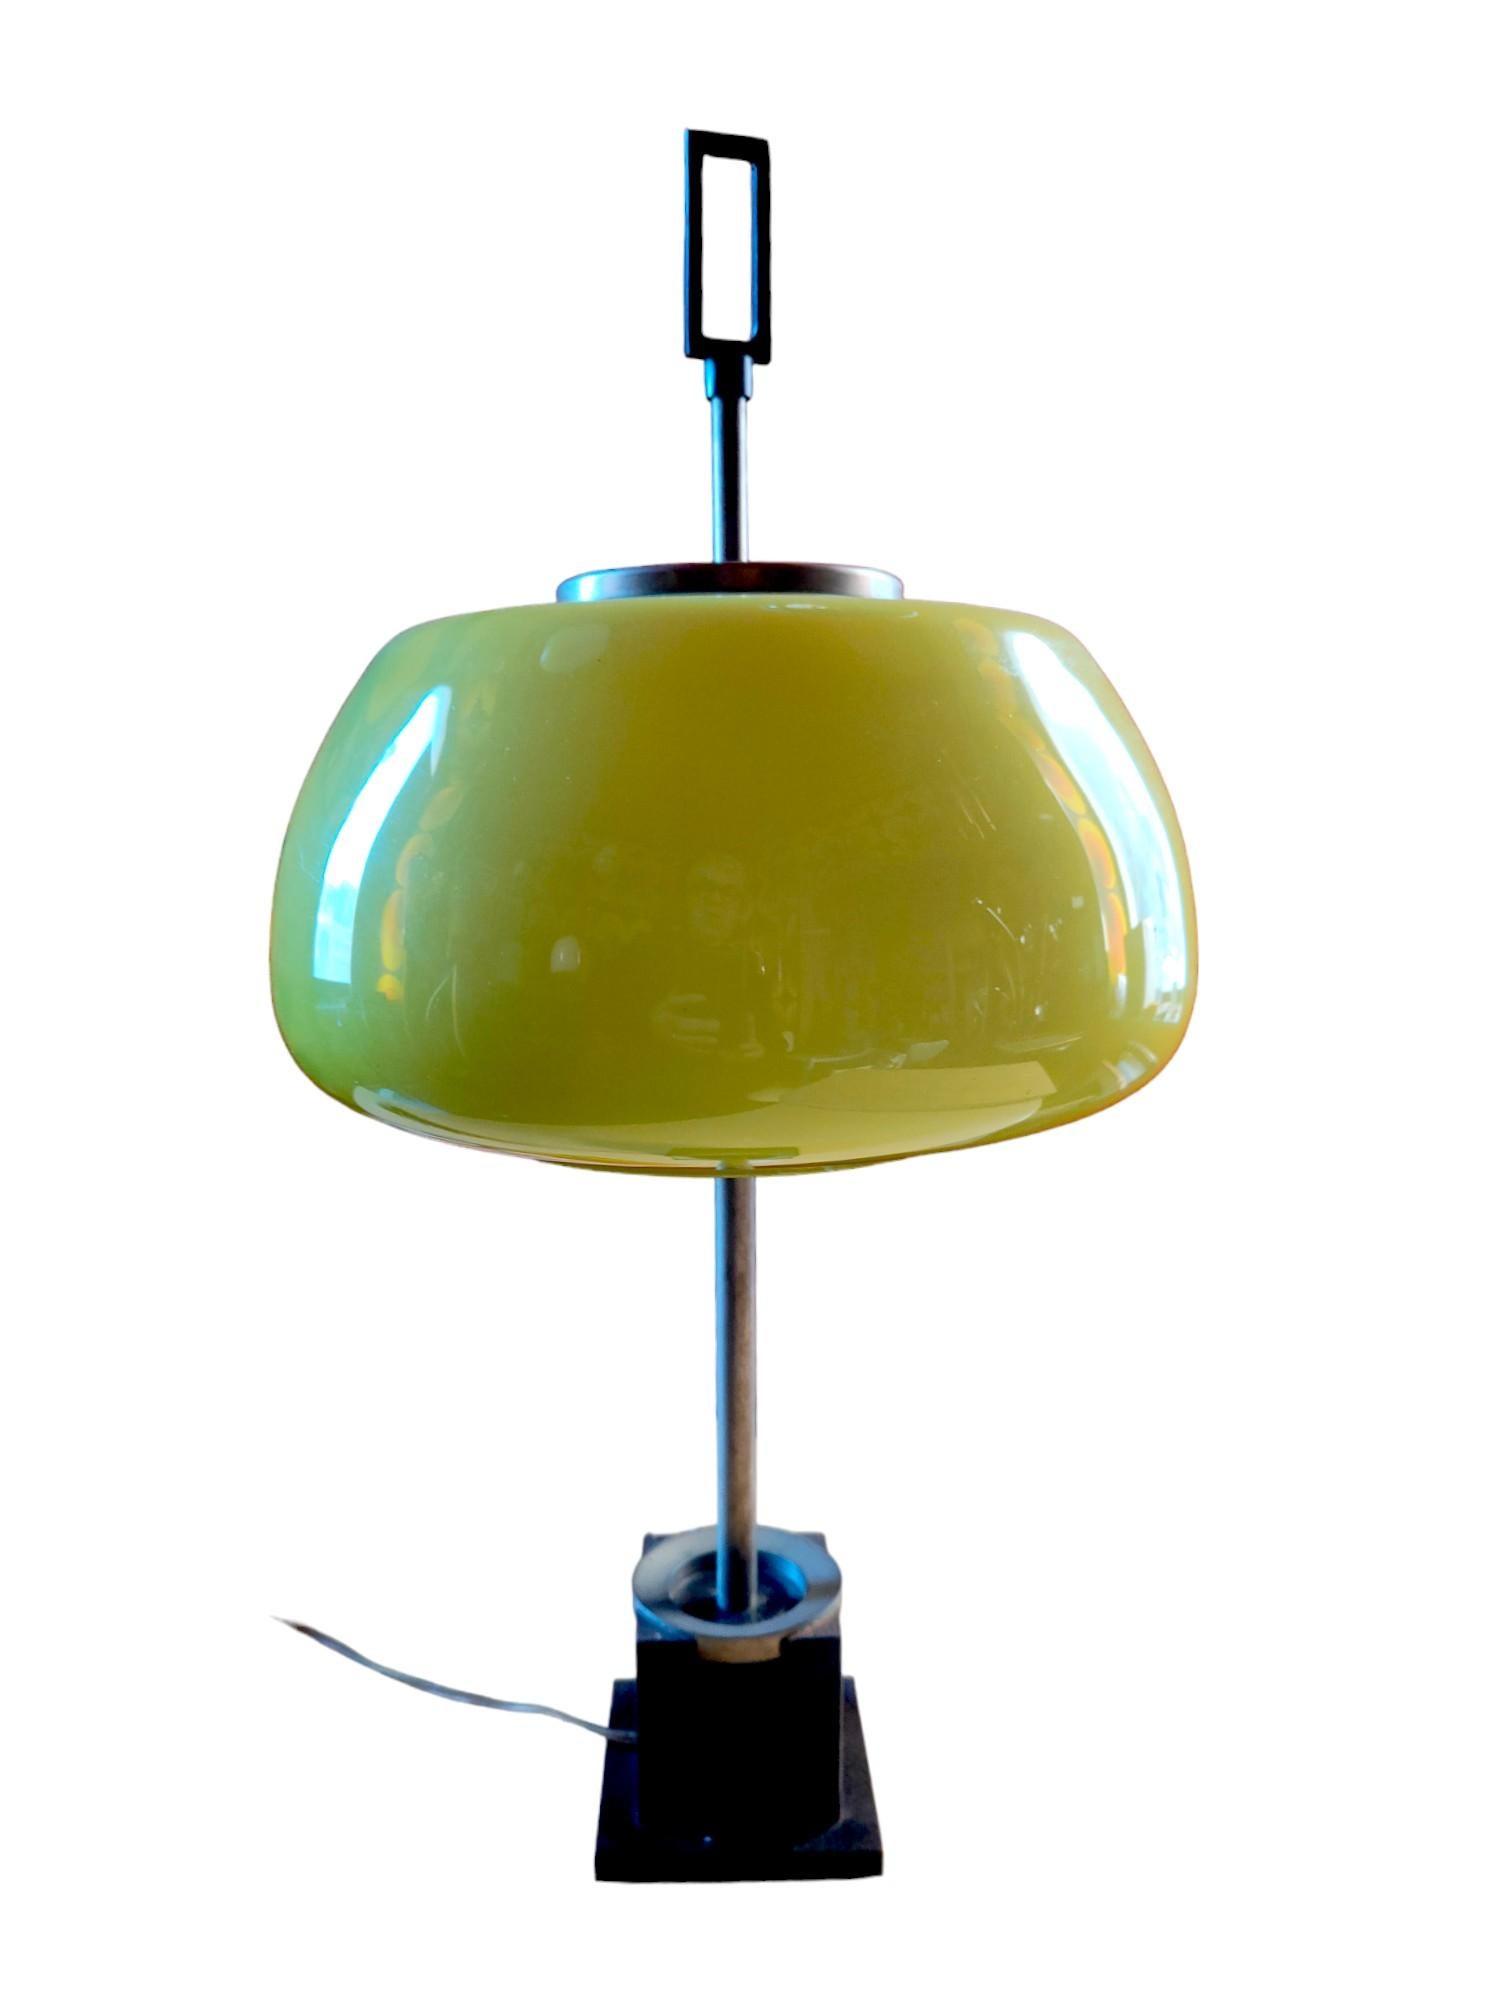 rare original table lamp from the 1960s, Production Lumi Milano based on a design by Oscar Torlasco.
Made of steel with nickel base, lampshade made of acid green etched murano glass.
It measures 55 cm in height, diameter of the  27 cm diffuser.
Very